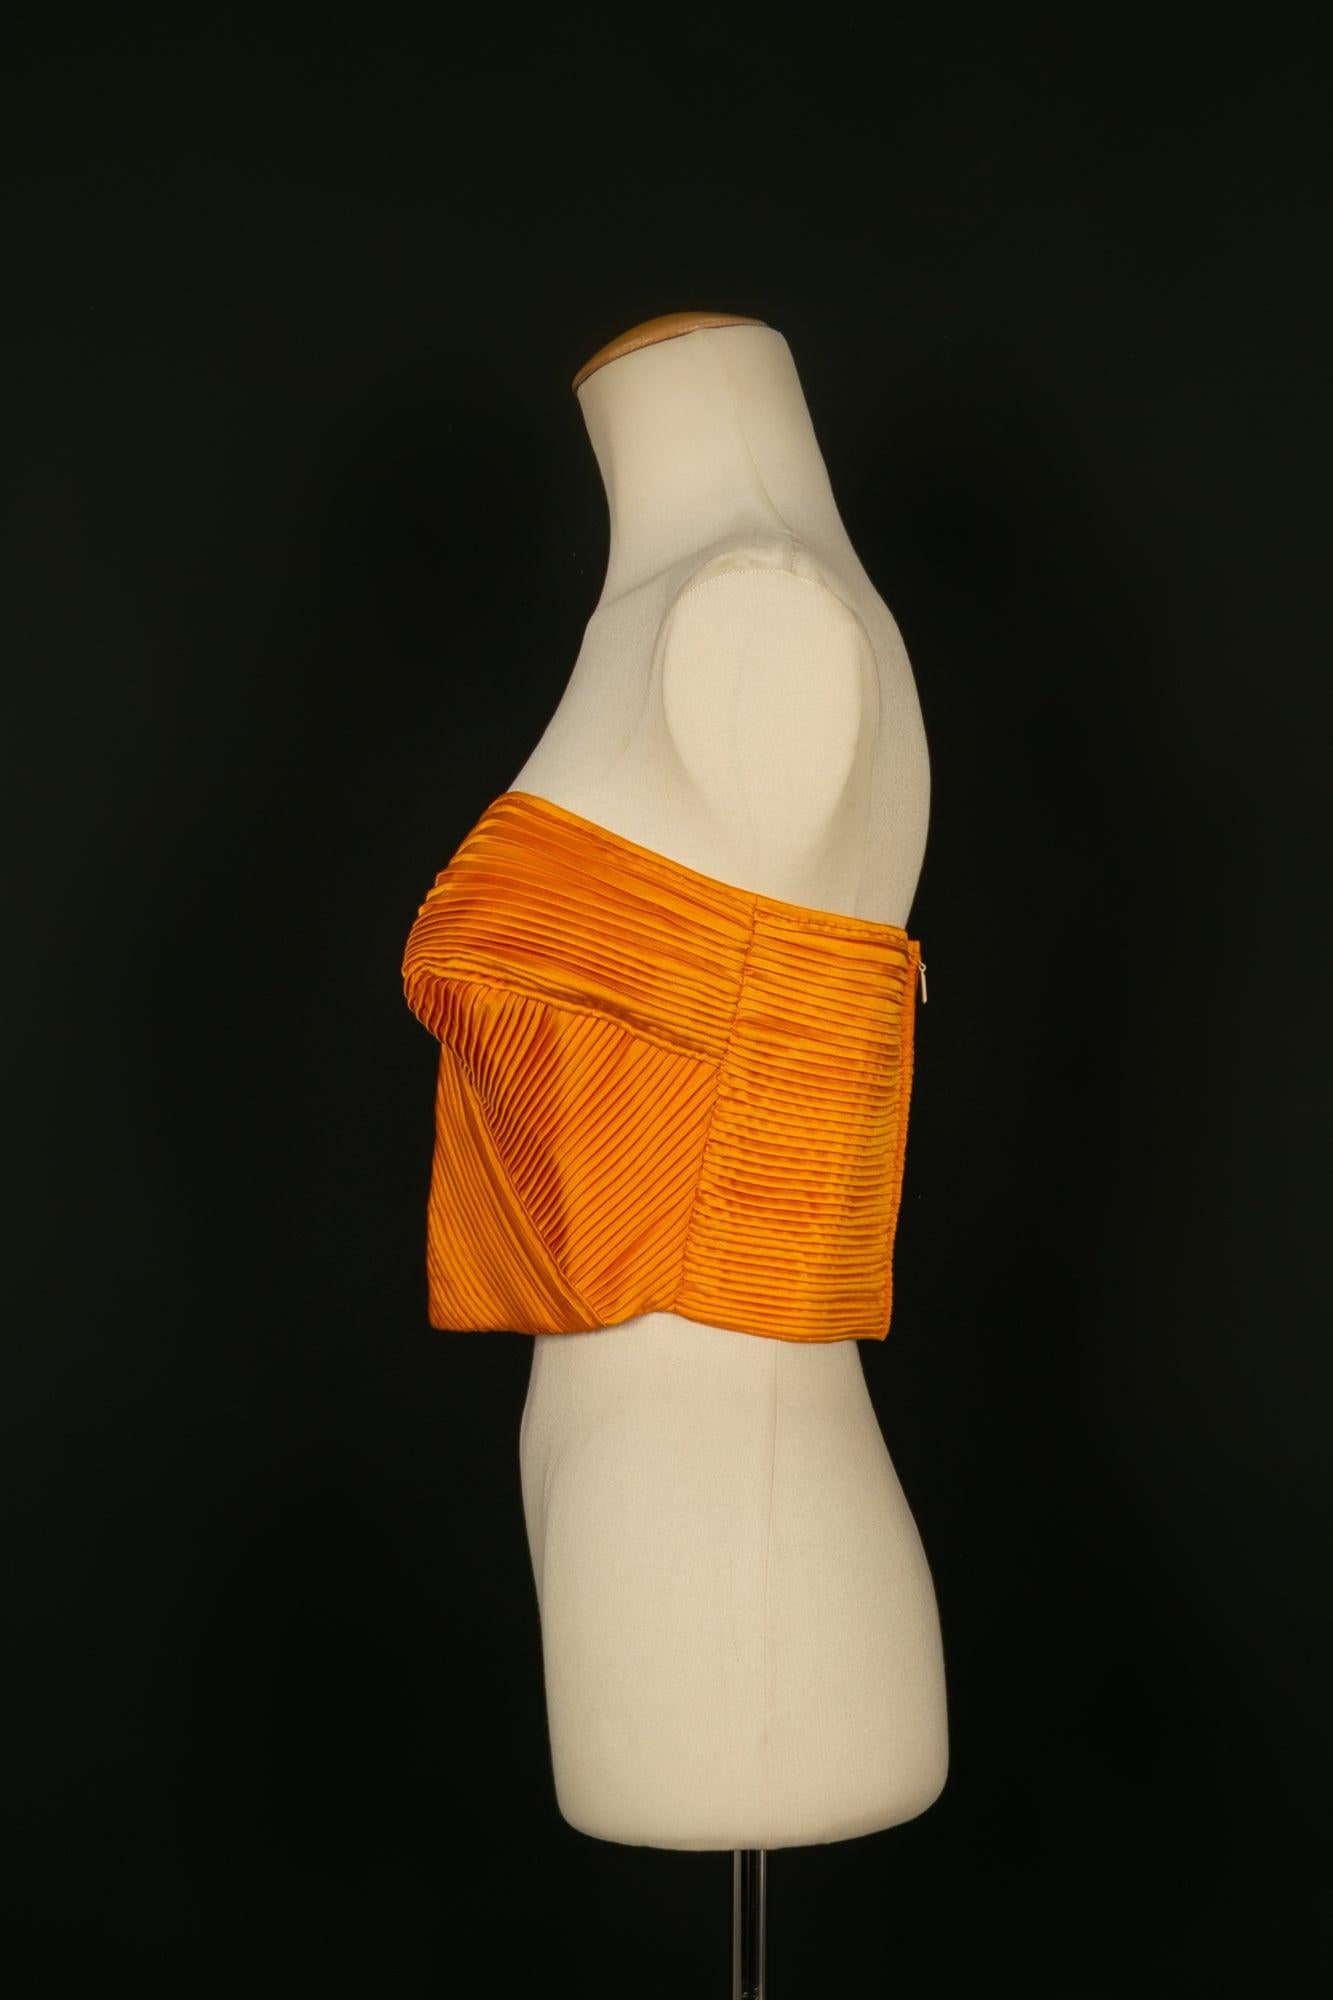 Valentino - Pleated bustier top in orange silk. No size label, it fits a 36FR.

Additional information:
Condition: Very good condition
Dimensions: Chest: 42 cm

Seller Reference: FH140
